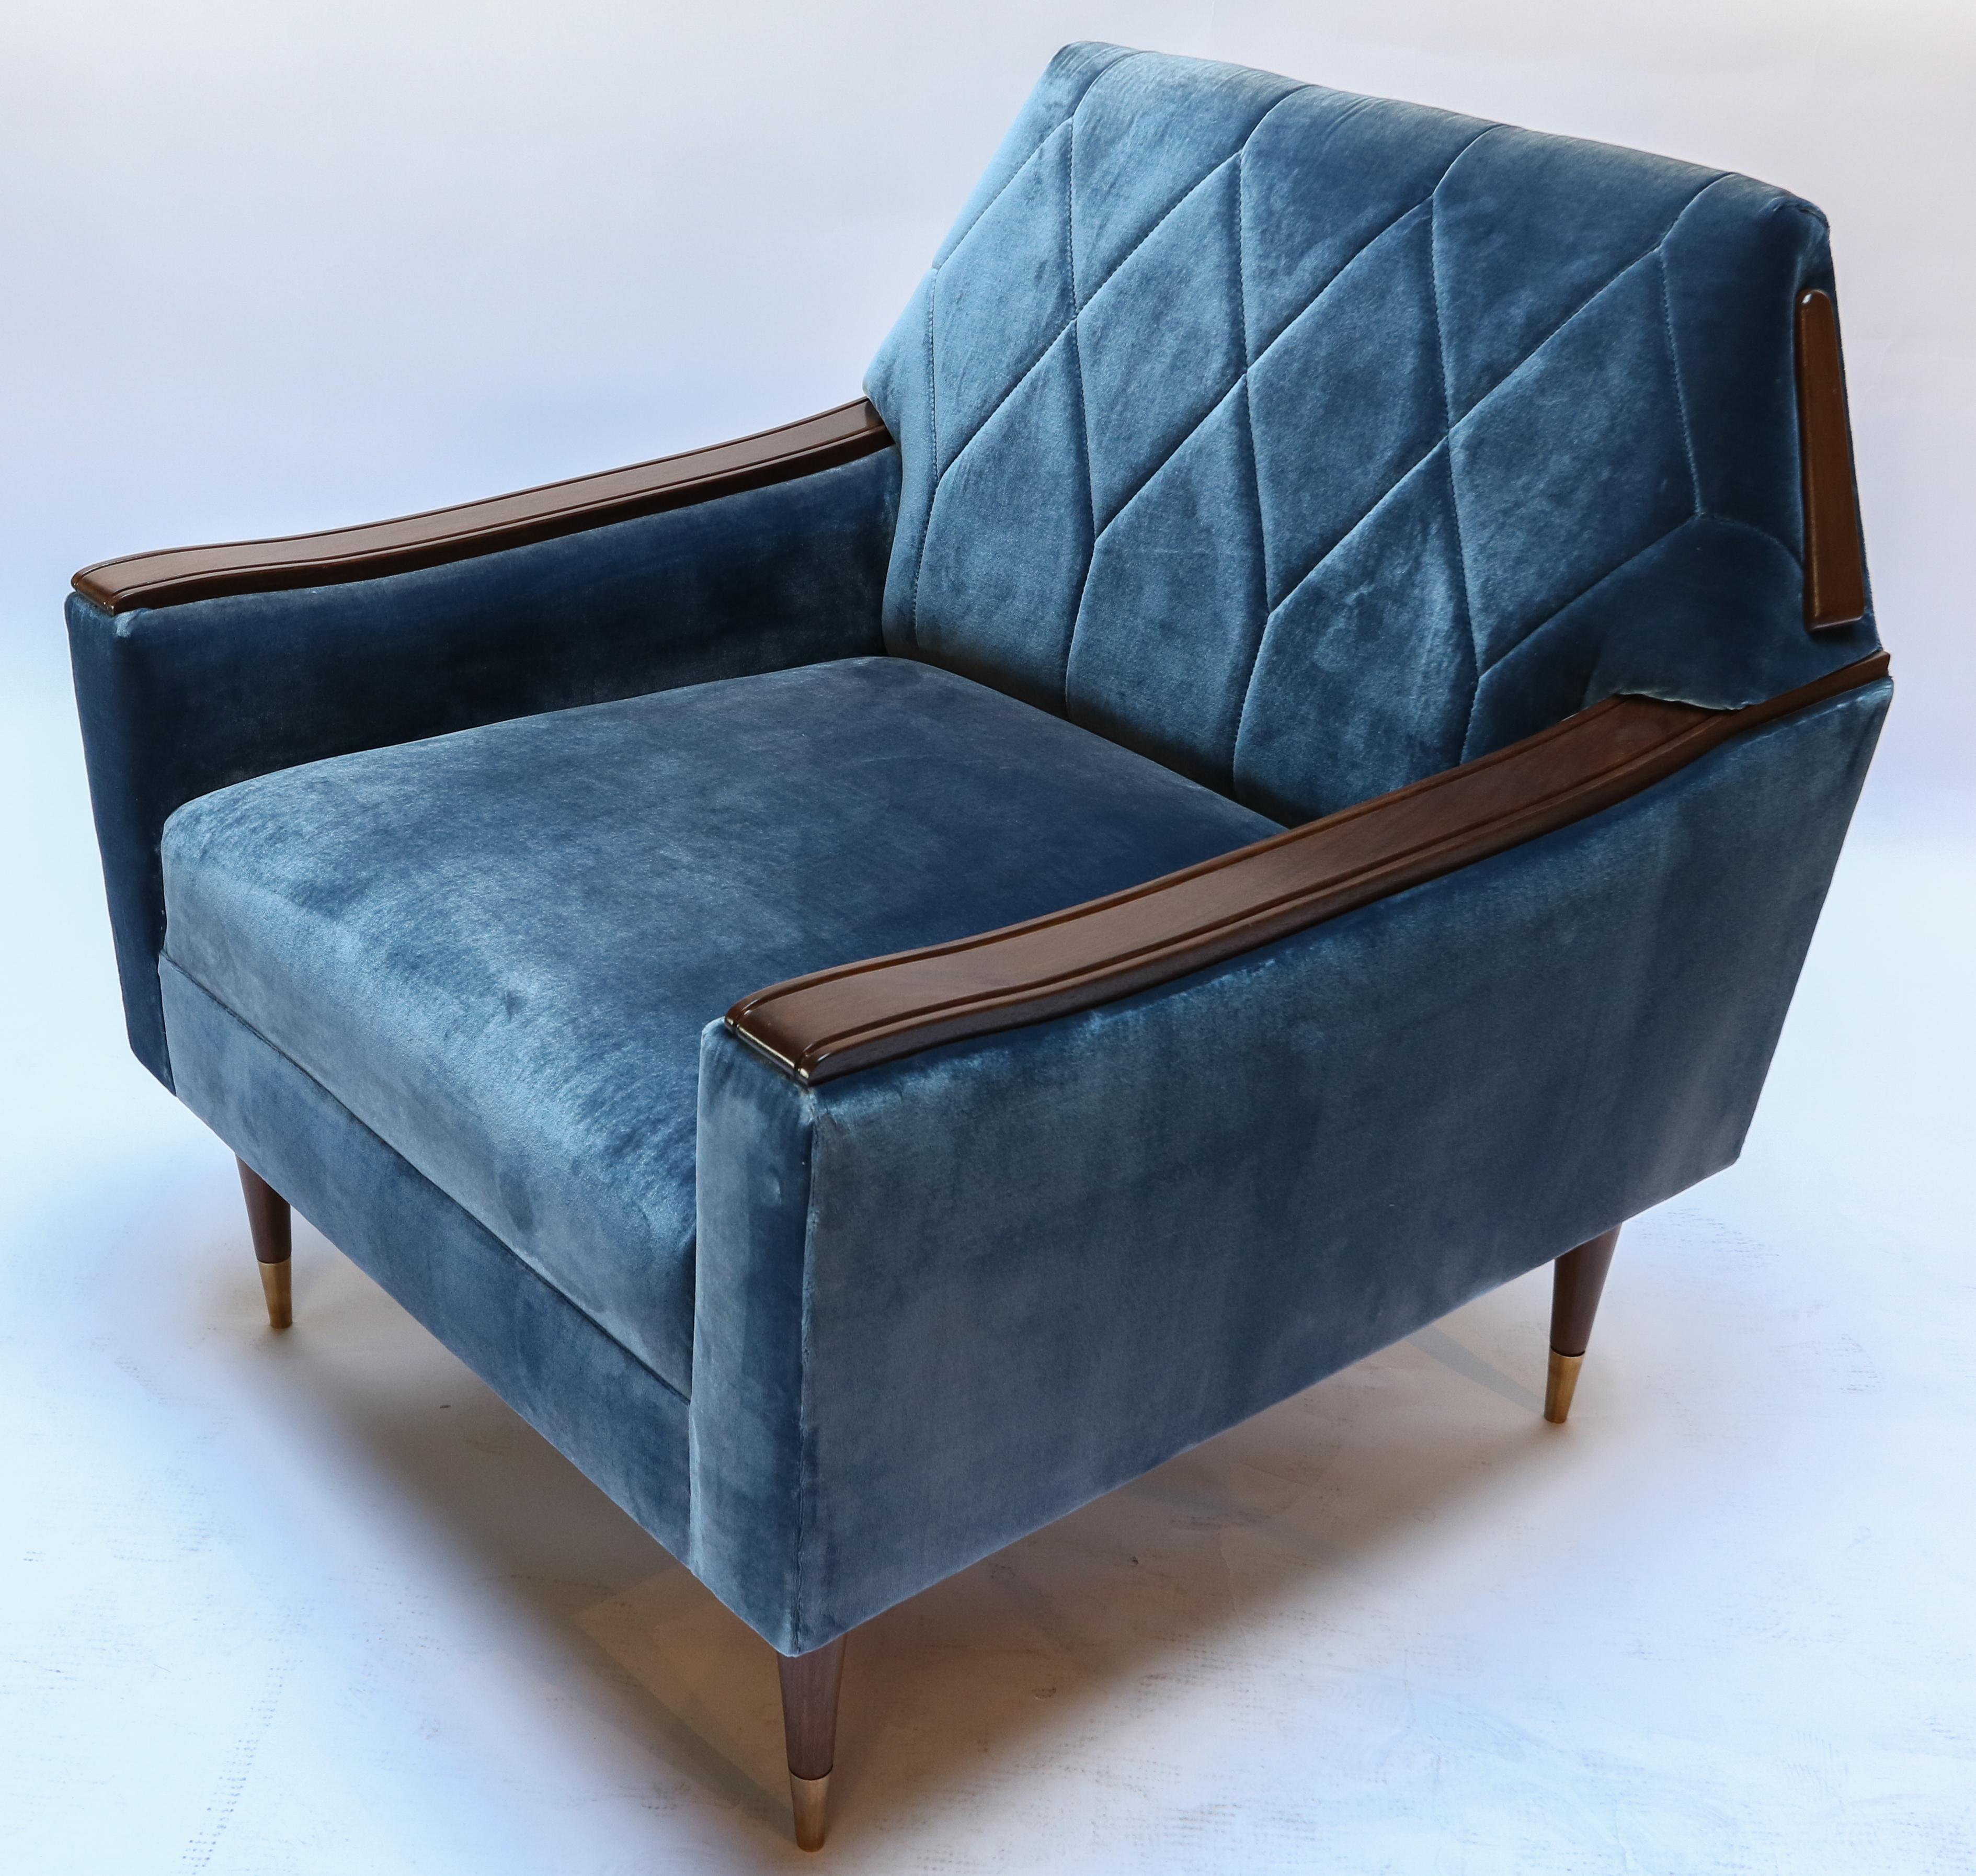 Pair of custom 1960s style armchairs upholstered in blue silk velvet with wood and brass details.  Made in Los Angeles by Adesso Imports. Can be done in different colors, fabrics and finishes.